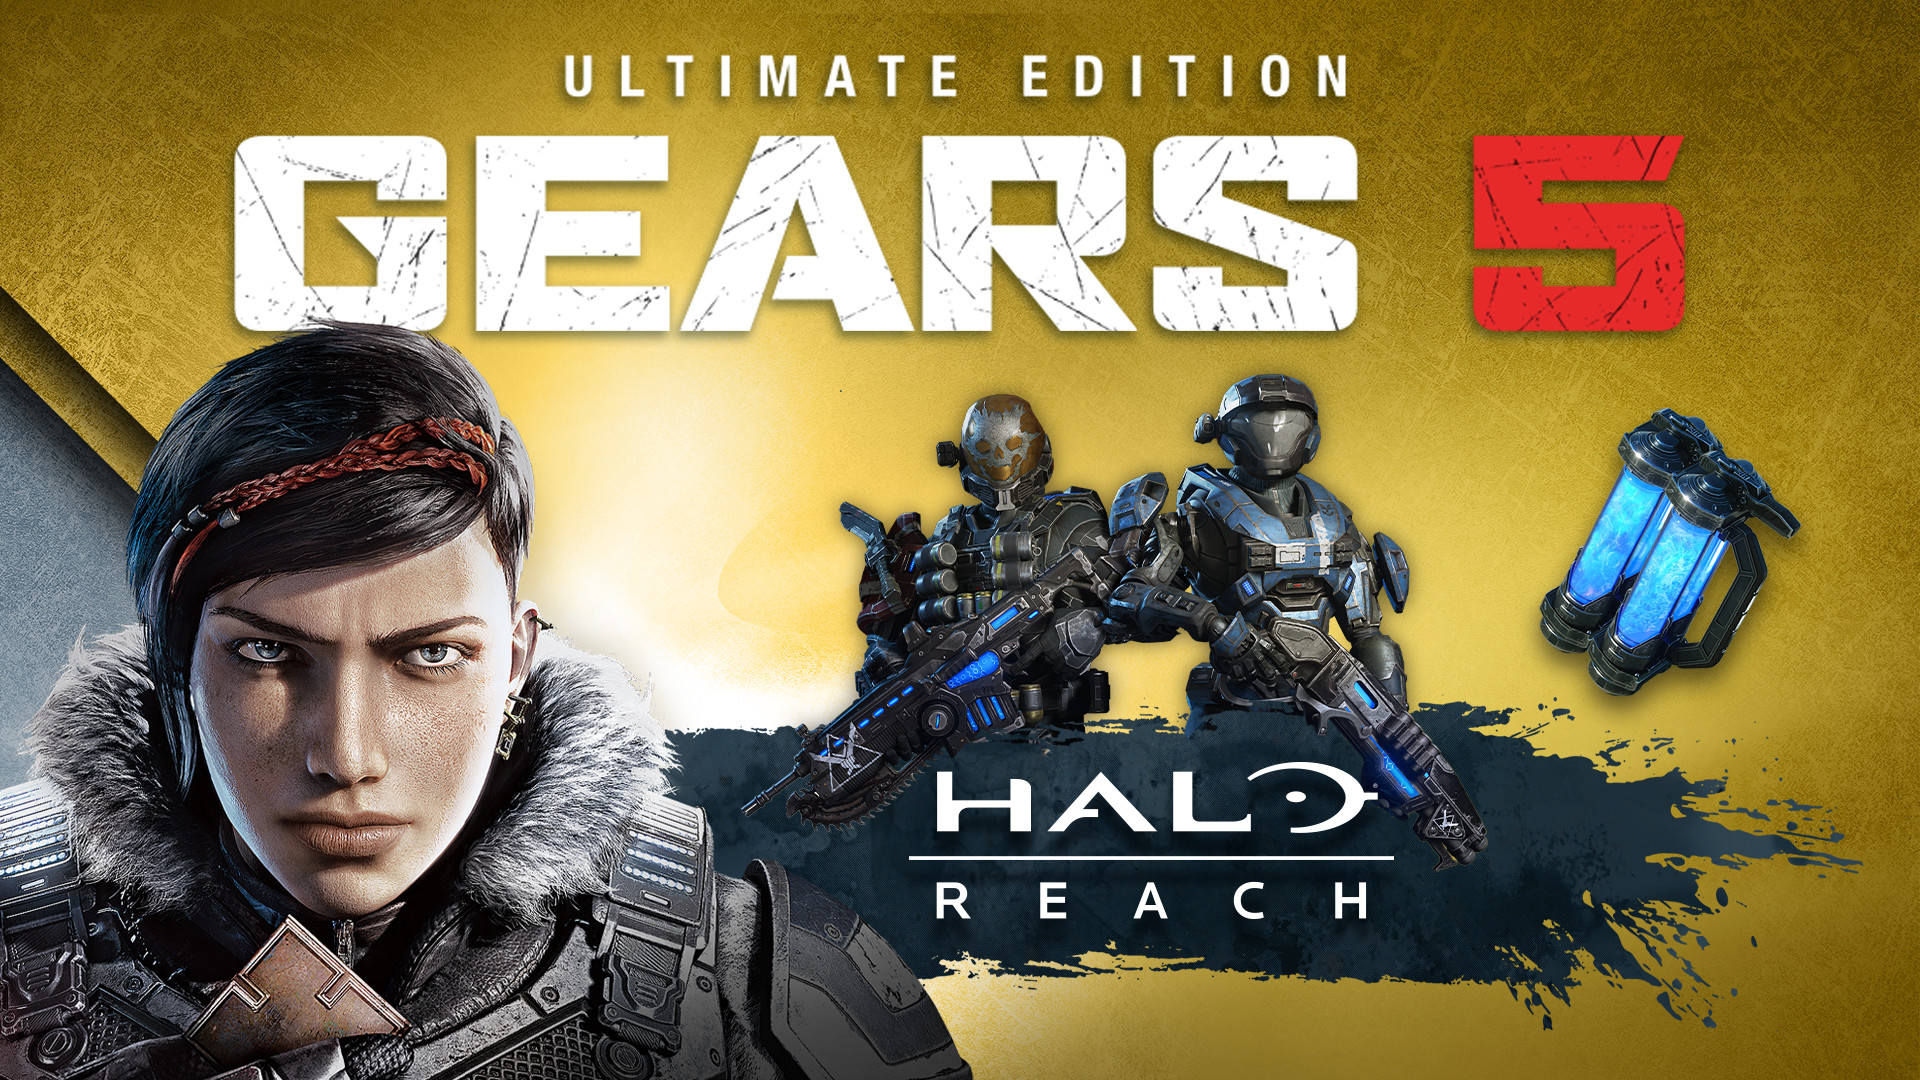 Gears 5 - Ultimate Edition DLC Content on Steam